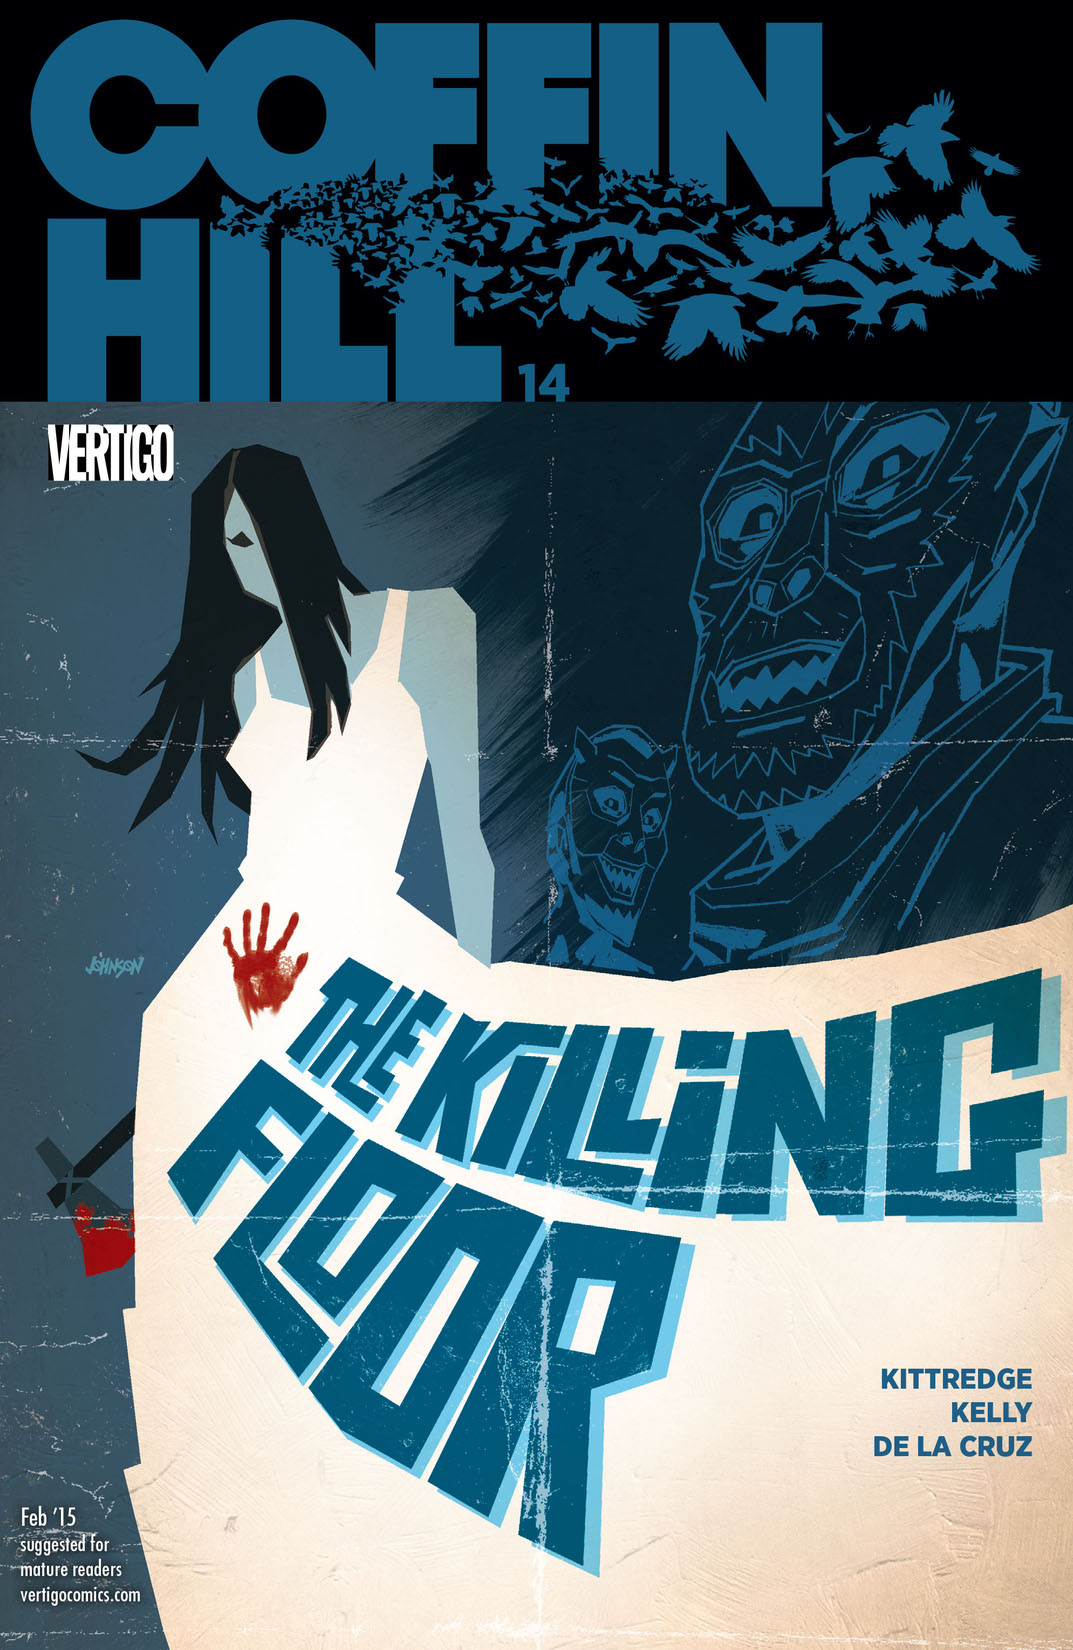 Coffin Hill #14 preview images